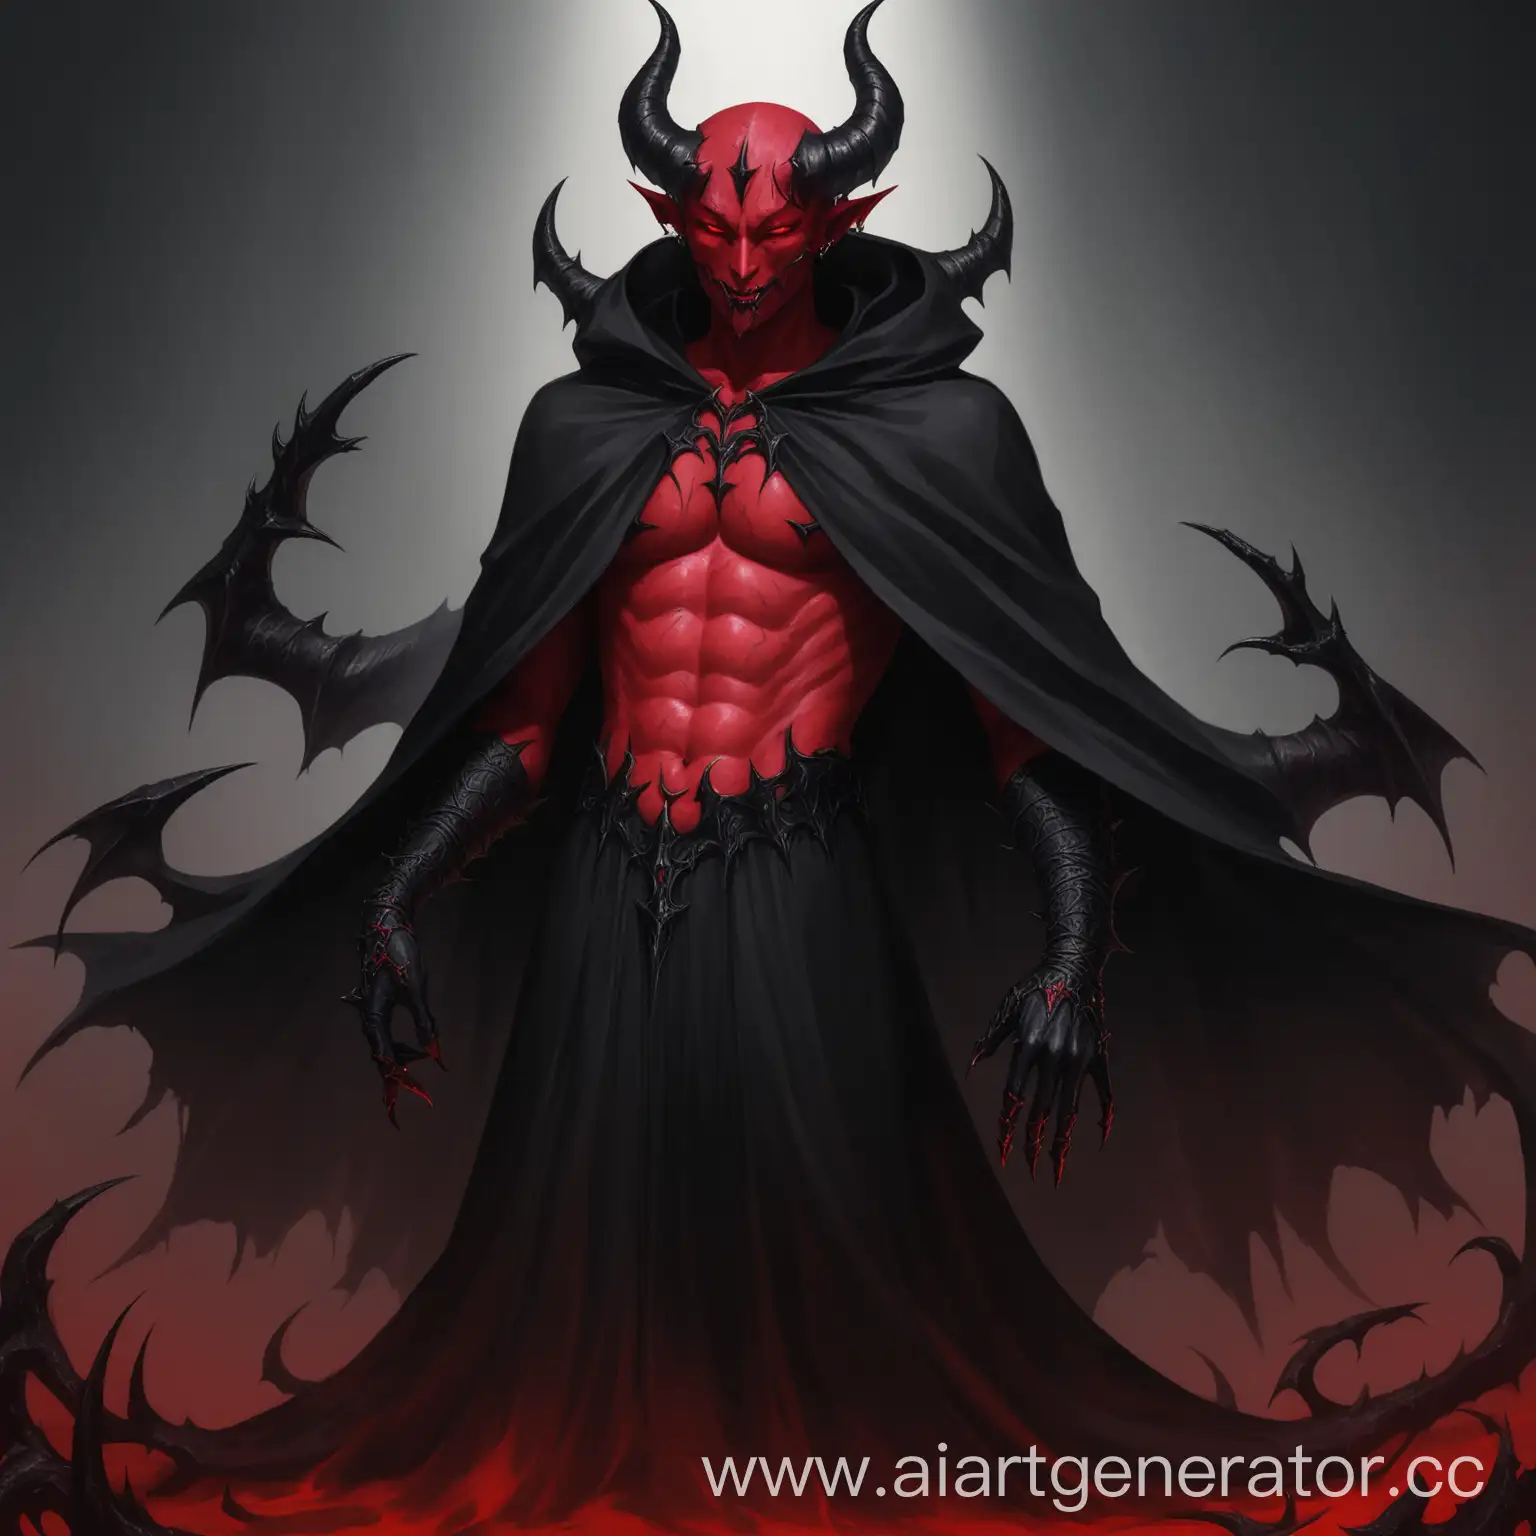 Sinister-Demon-in-Black-Cloak-and-Gloves-with-Red-Skin-and-Horns